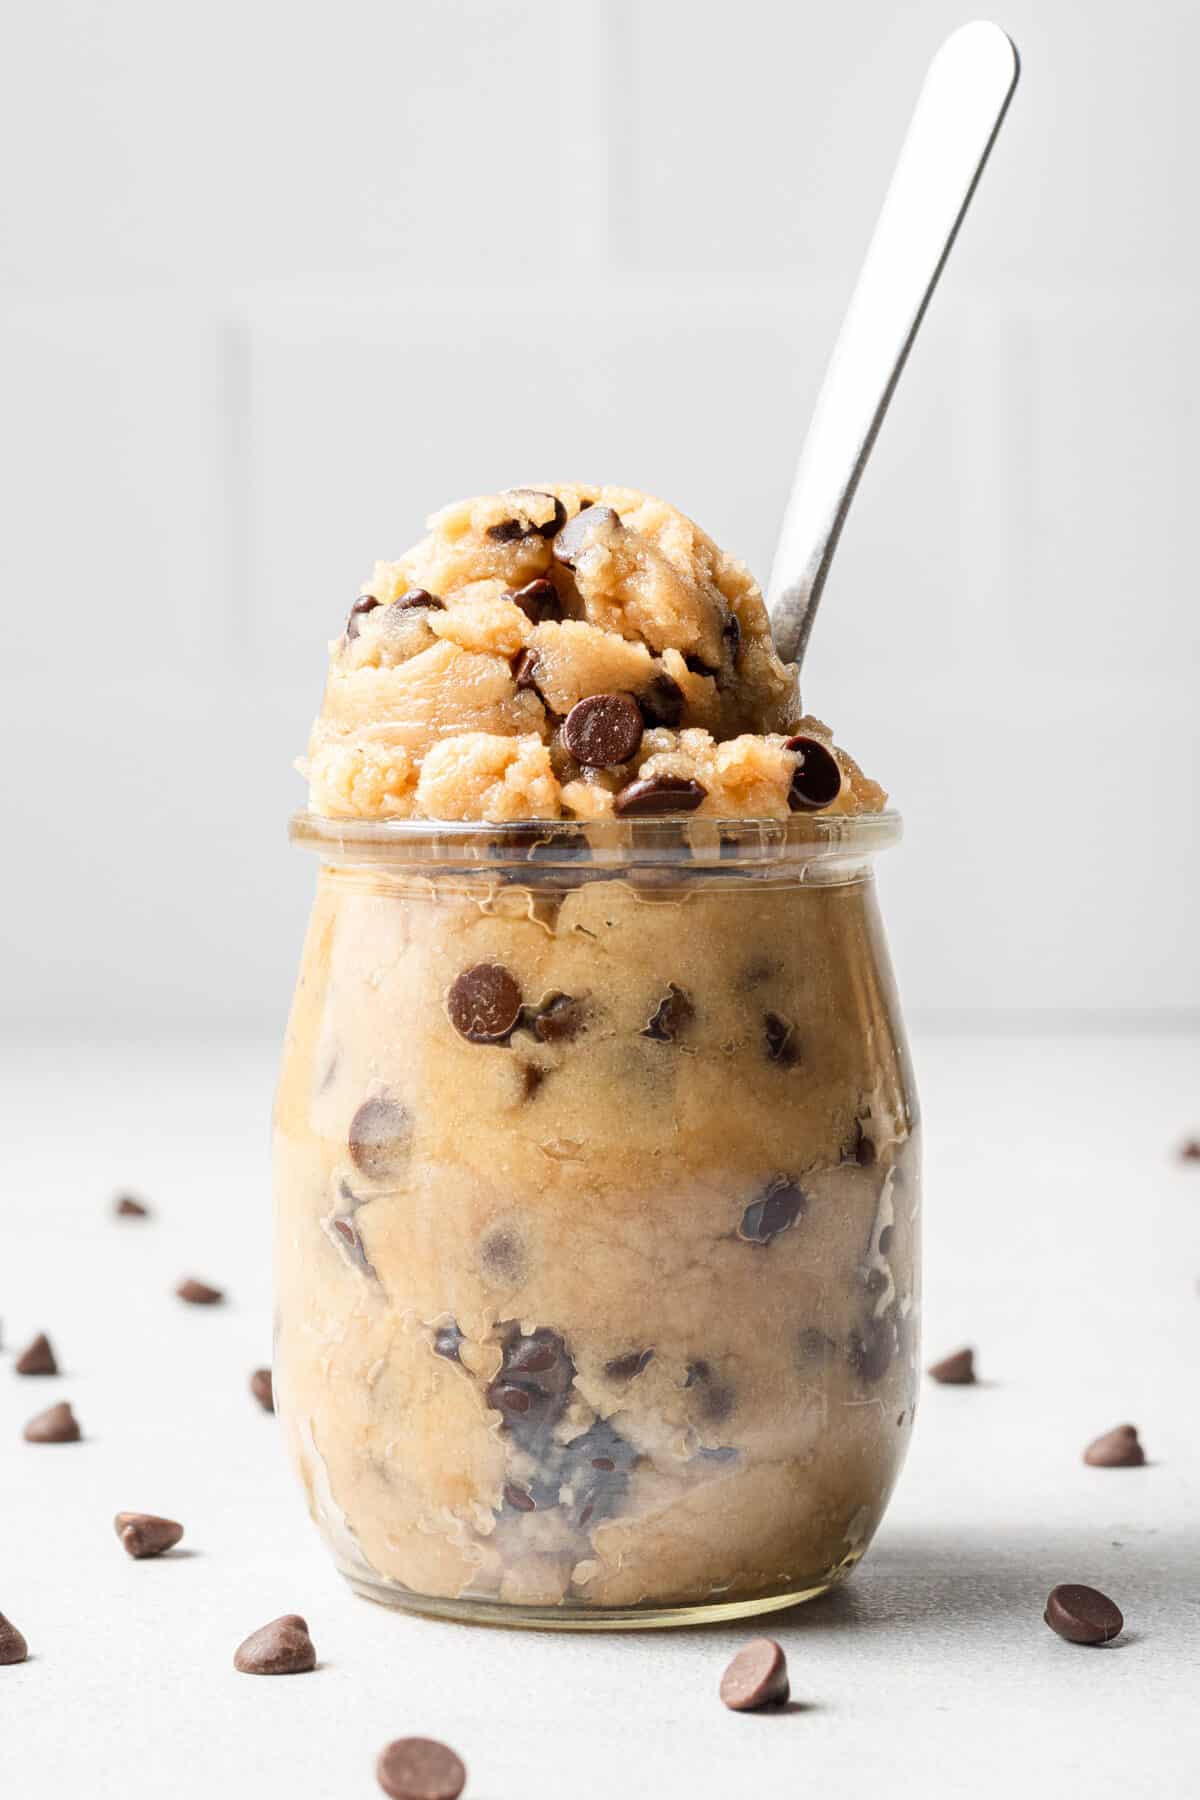 vegan edible cookie dough pictured in a glass jar with a spoon in it